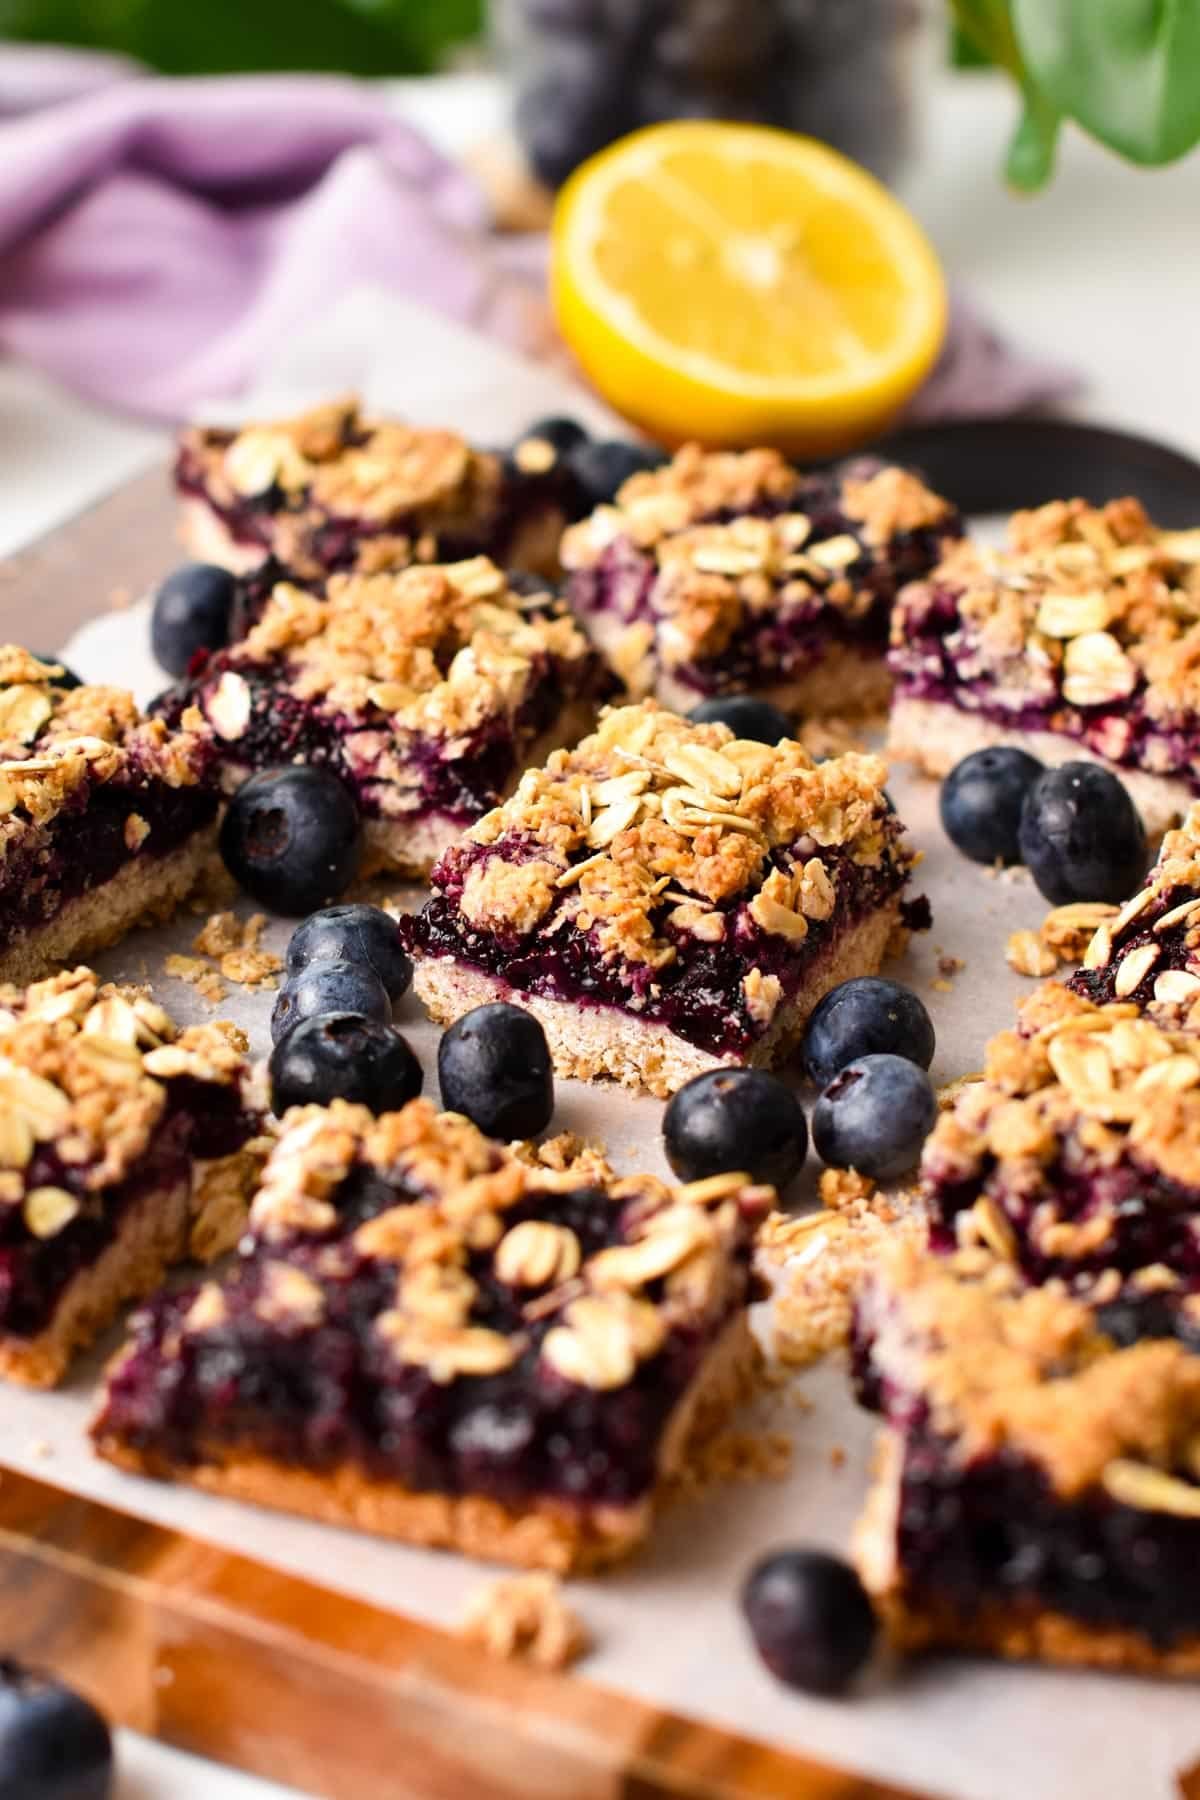 Squares of blueberry oatmeal bars on a chopping board with blueberries around and a lemon in the background.